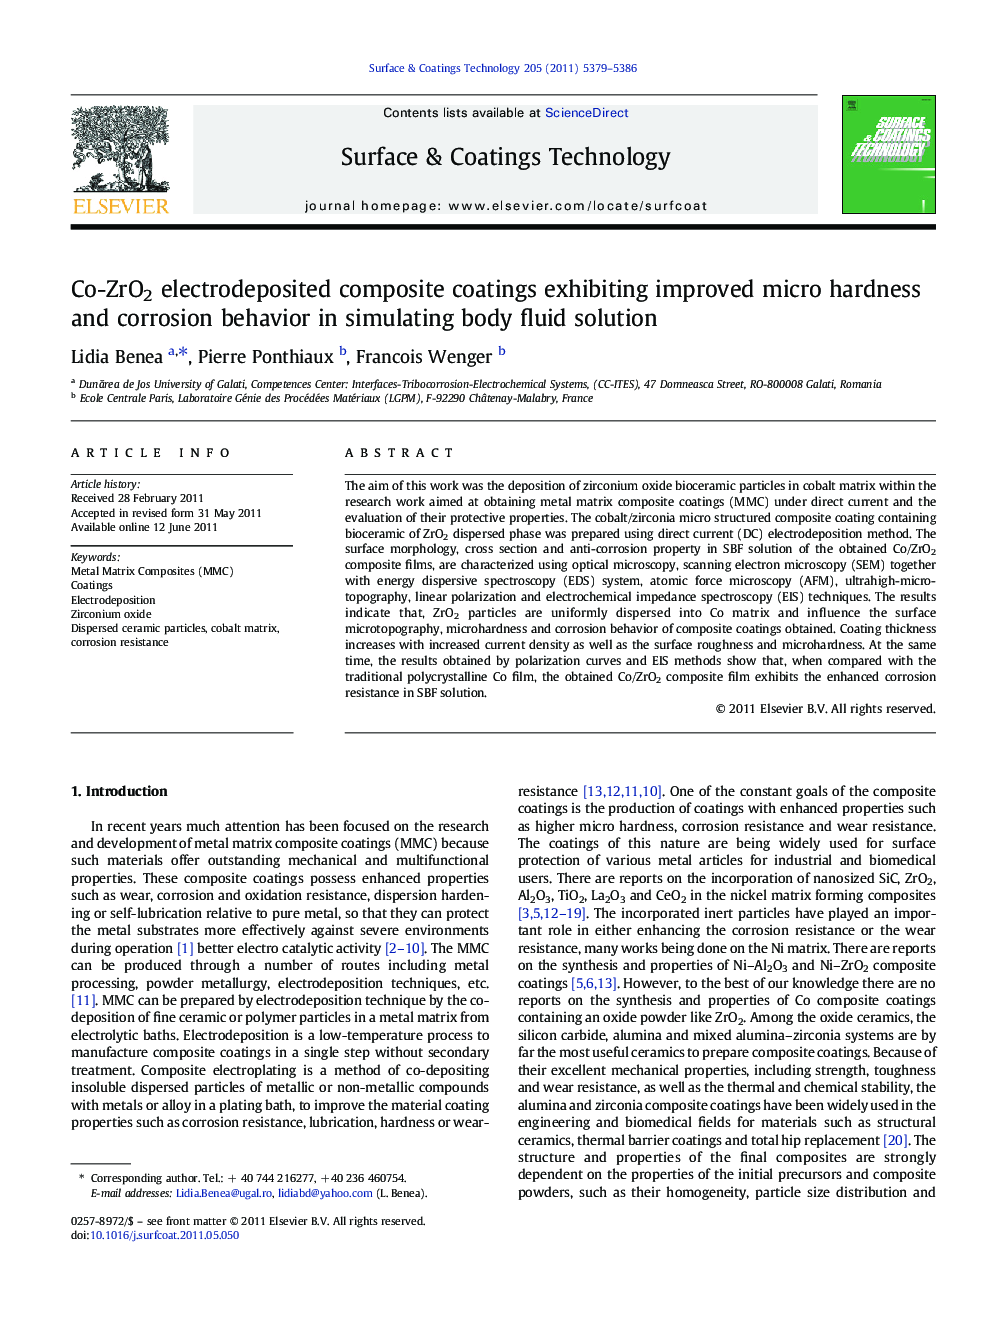 Co-ZrO2 electrodeposited composite coatings exhibiting improved micro hardness and corrosion behavior in simulating body fluid solution